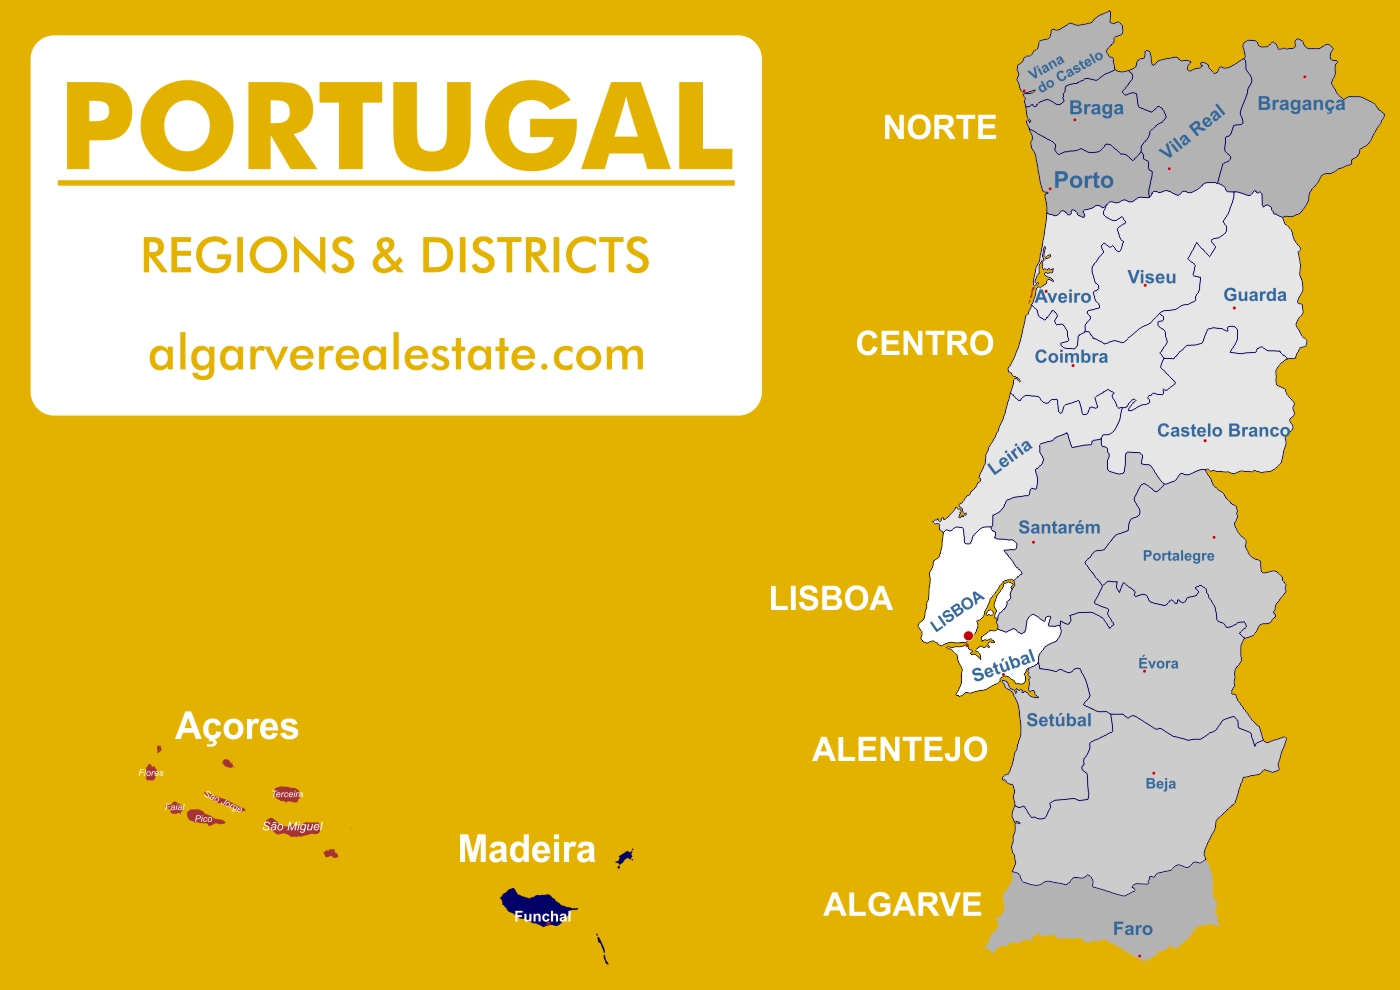 Map of the regions and districts of Portugal